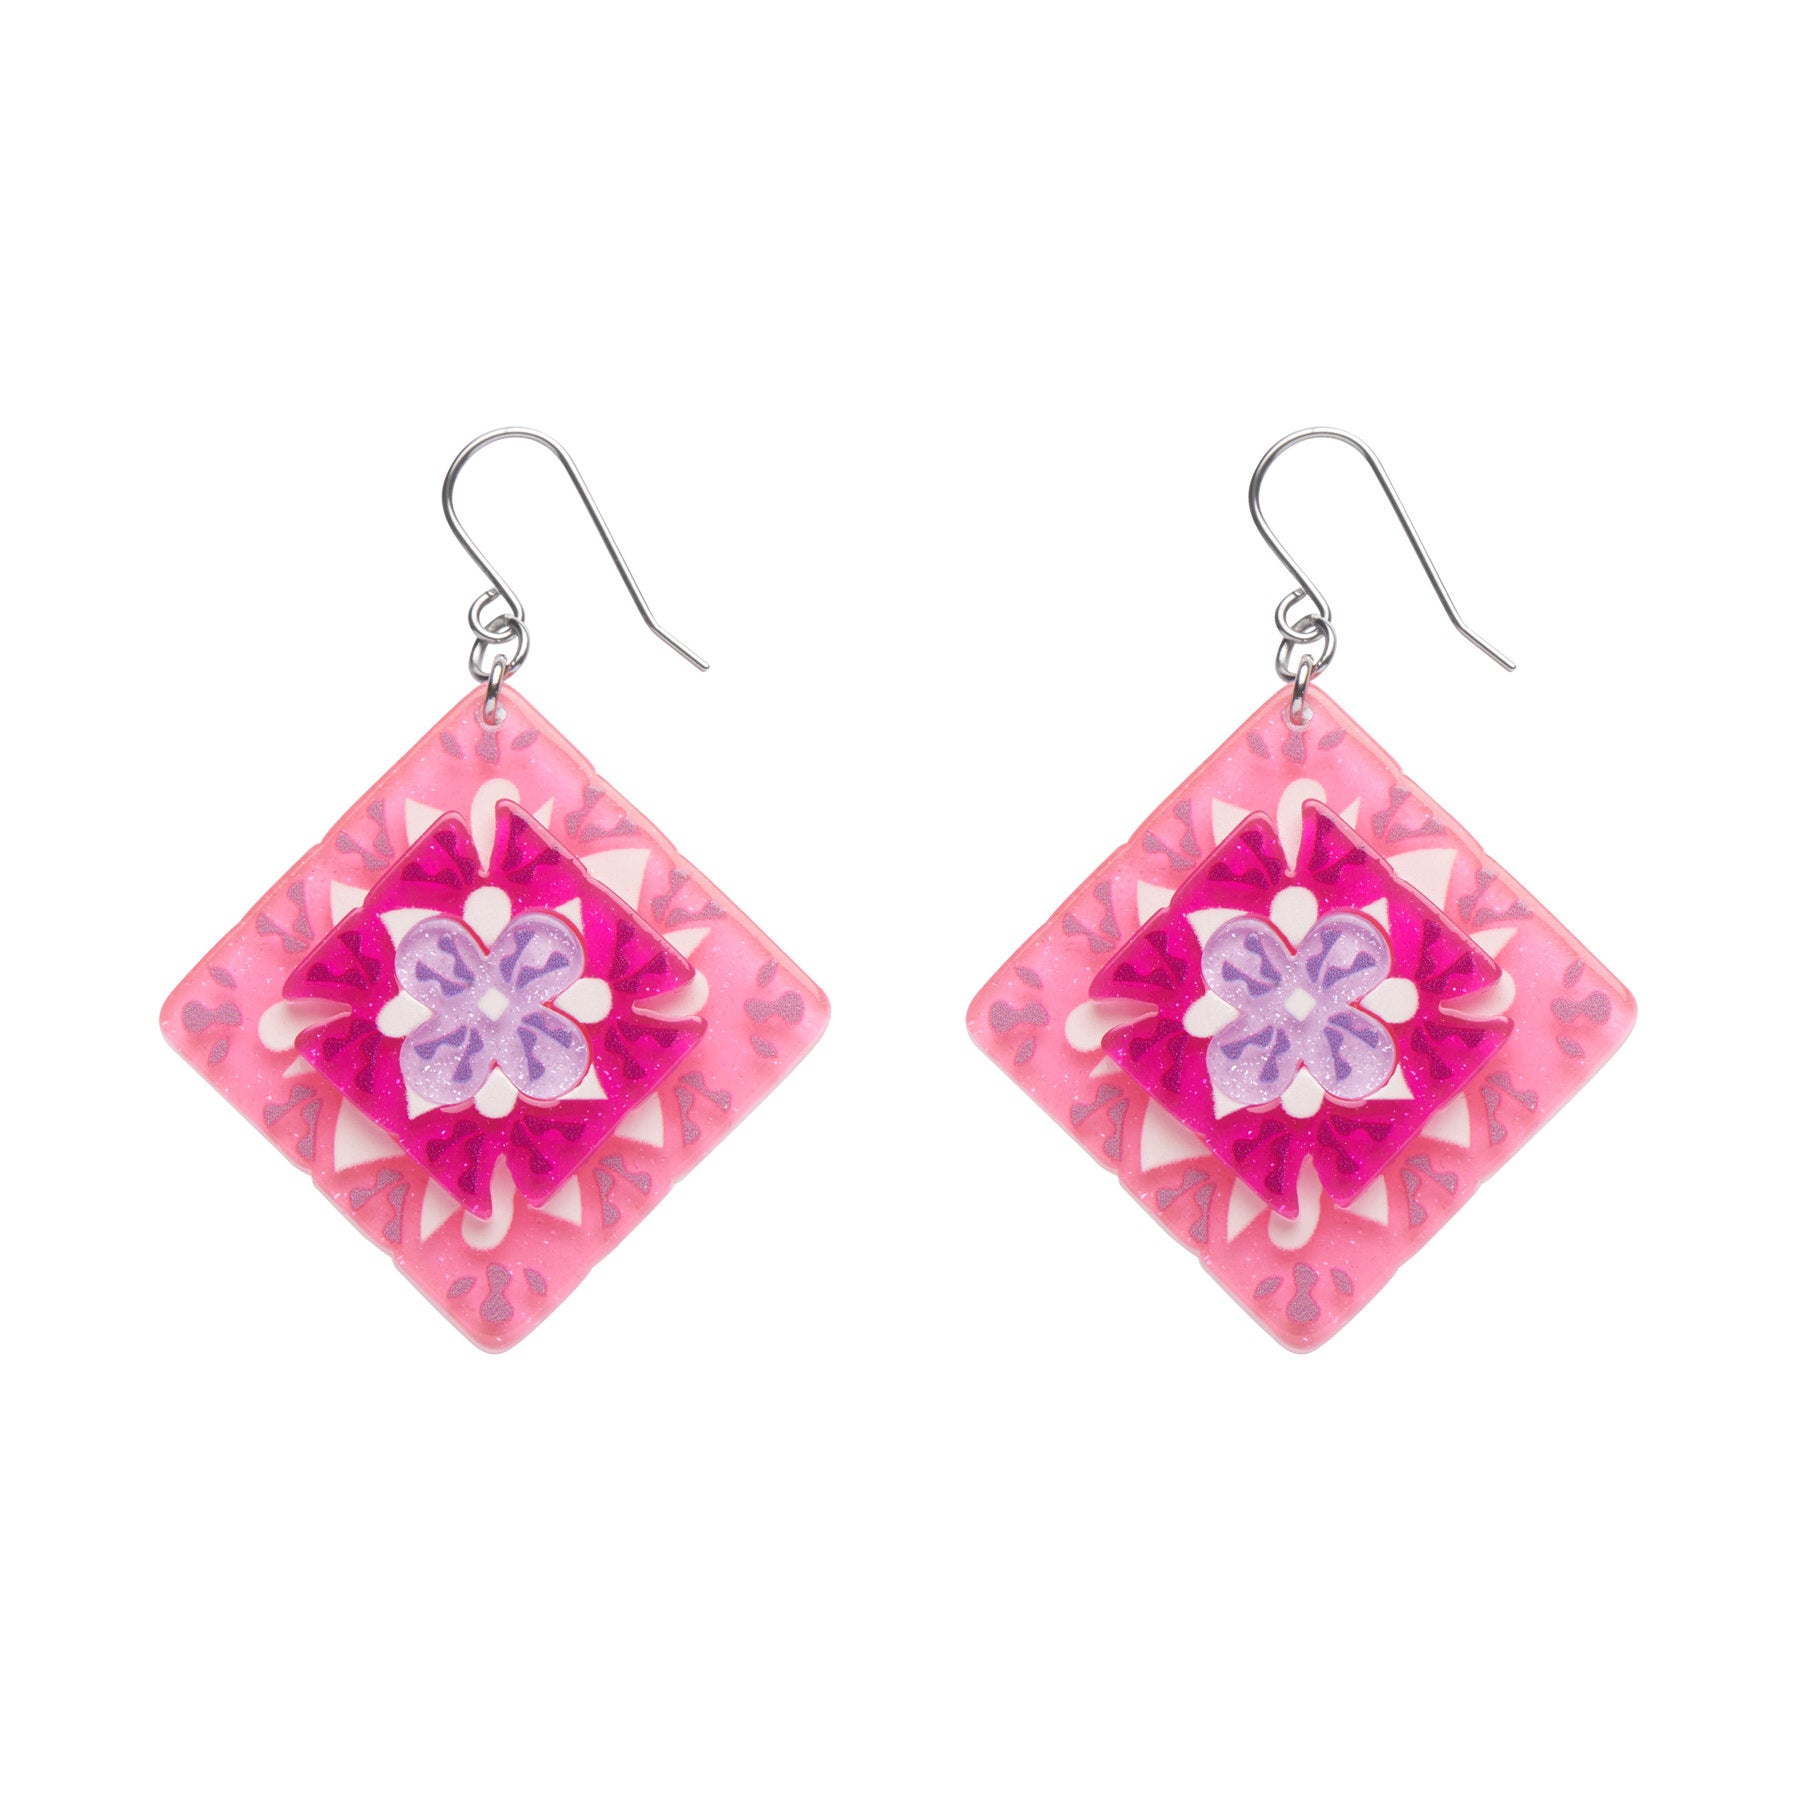 Cosy Things Collection "Cosy Comfort” layered resin crochet granny square dangle earrings in pink colorway